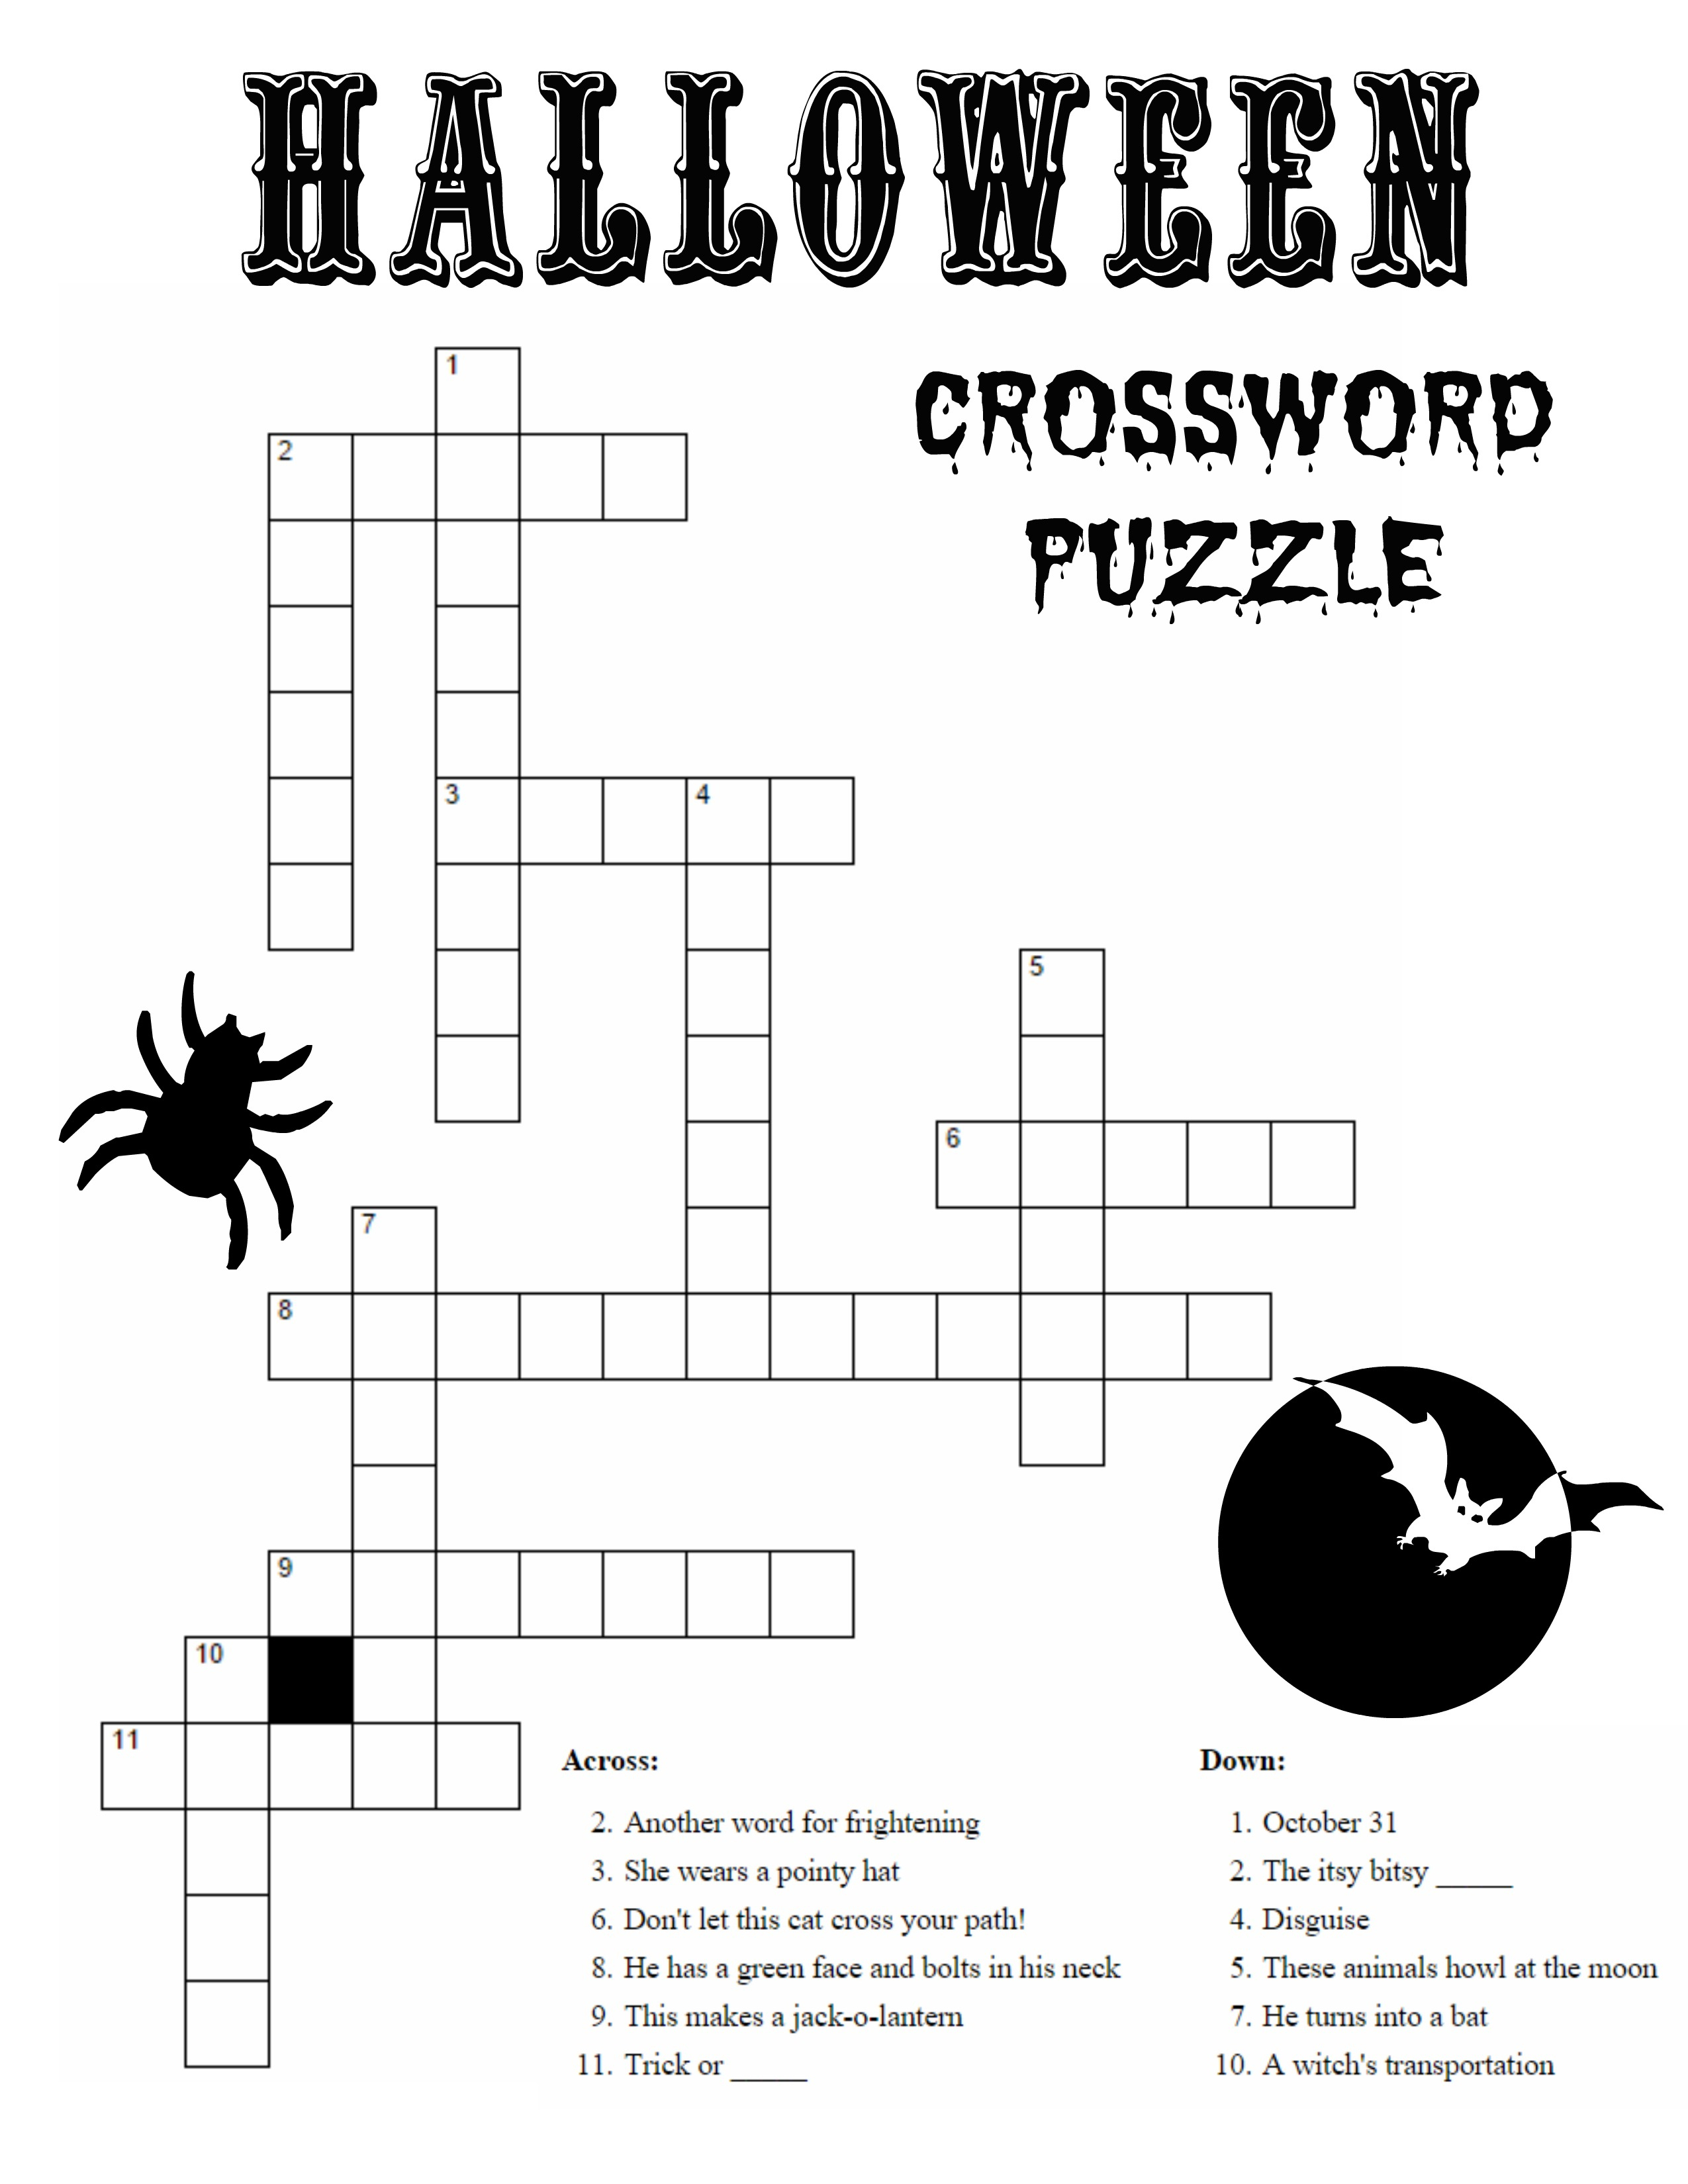 Halloween Crossword Puzzles For Adults Printable Printable Crossword Puzzles